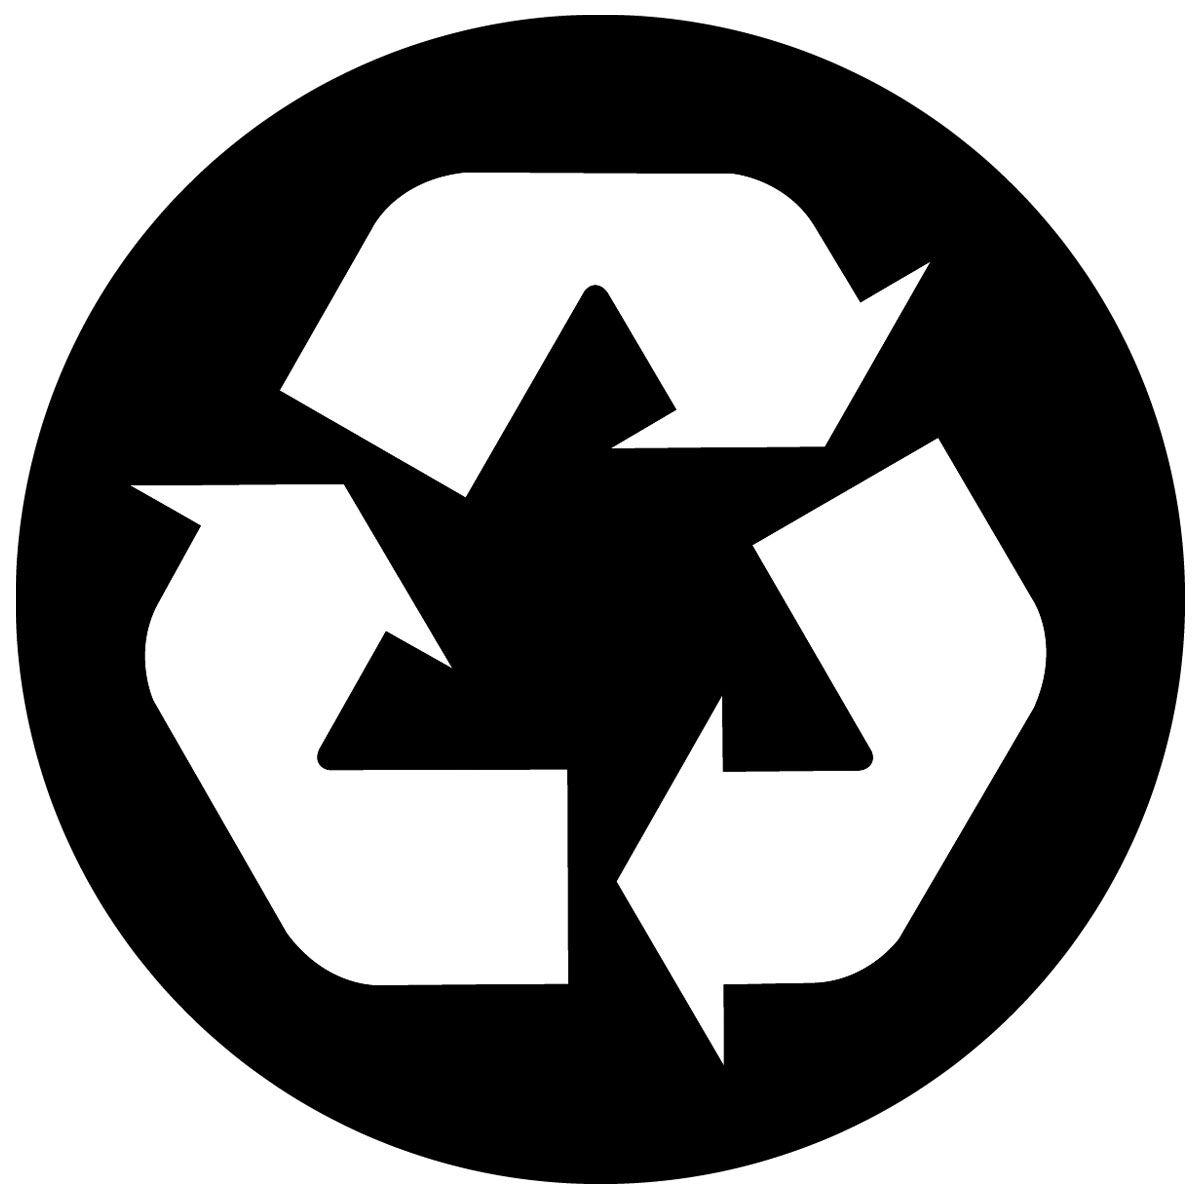 Black and White Recycle Logo - Free Recycle Symbol, Download Free Clip Art, Free Clip Art